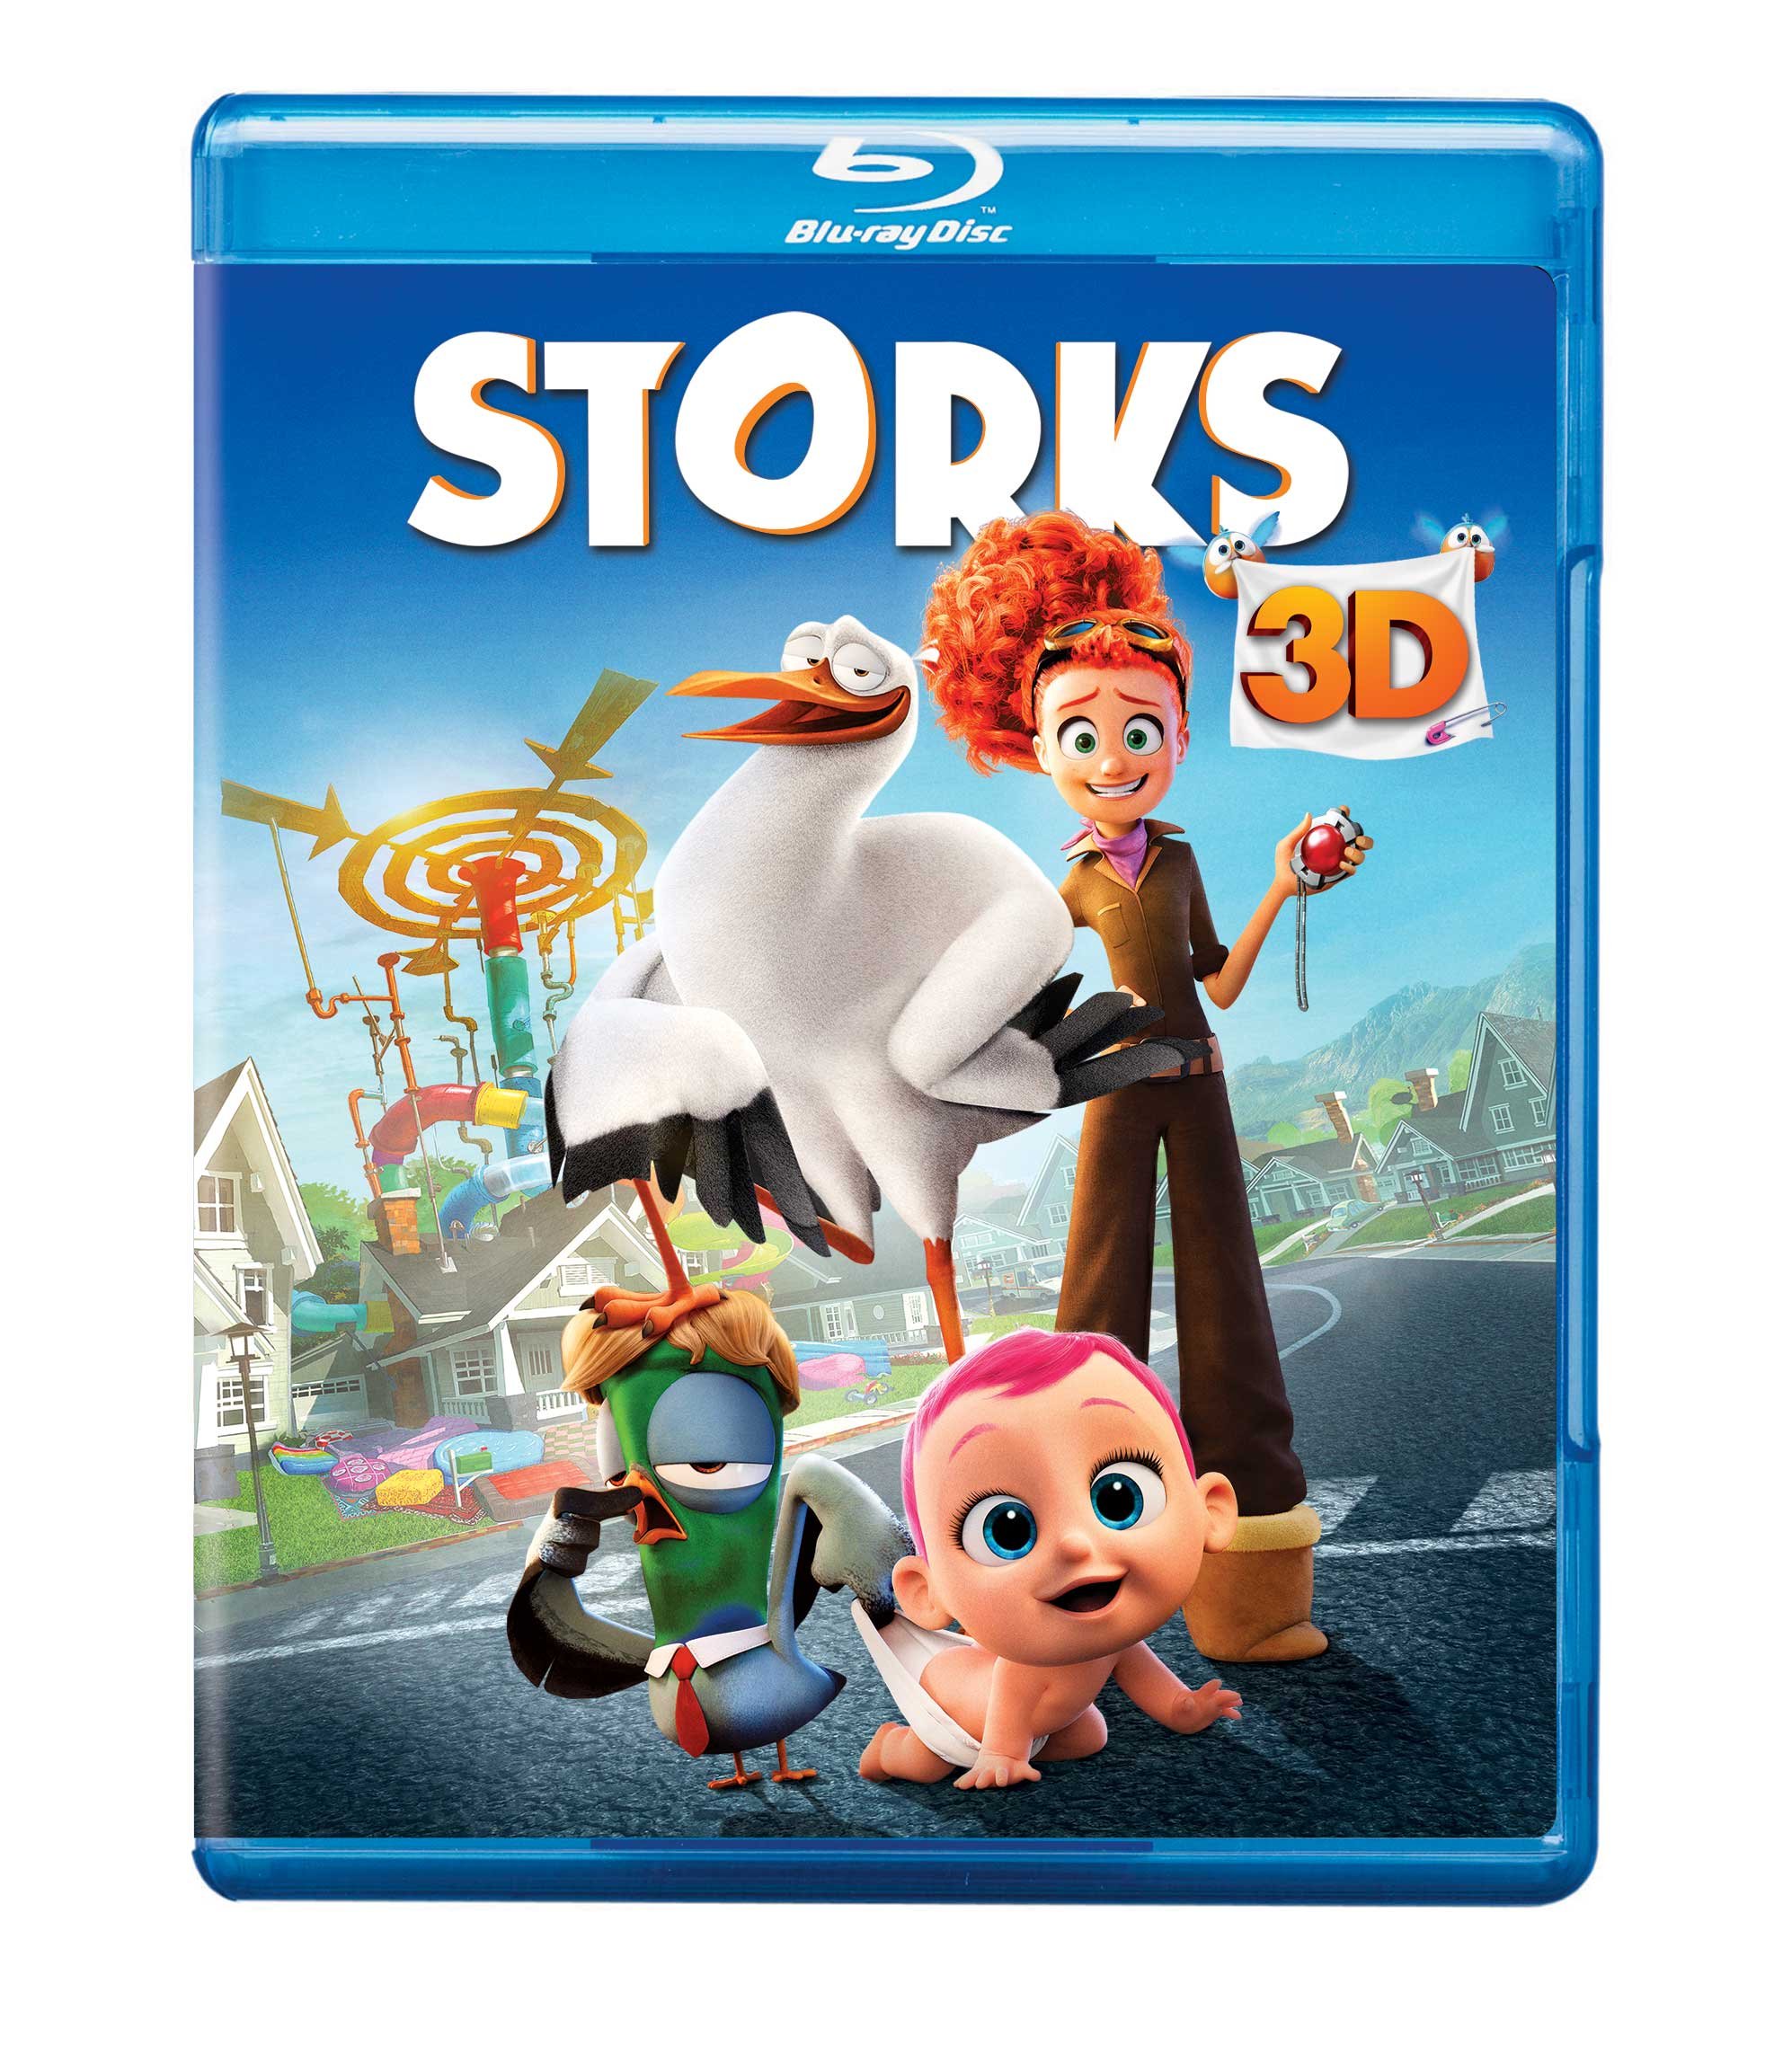 storks-3d-blu-ray-movie-purchase-or-watch-online